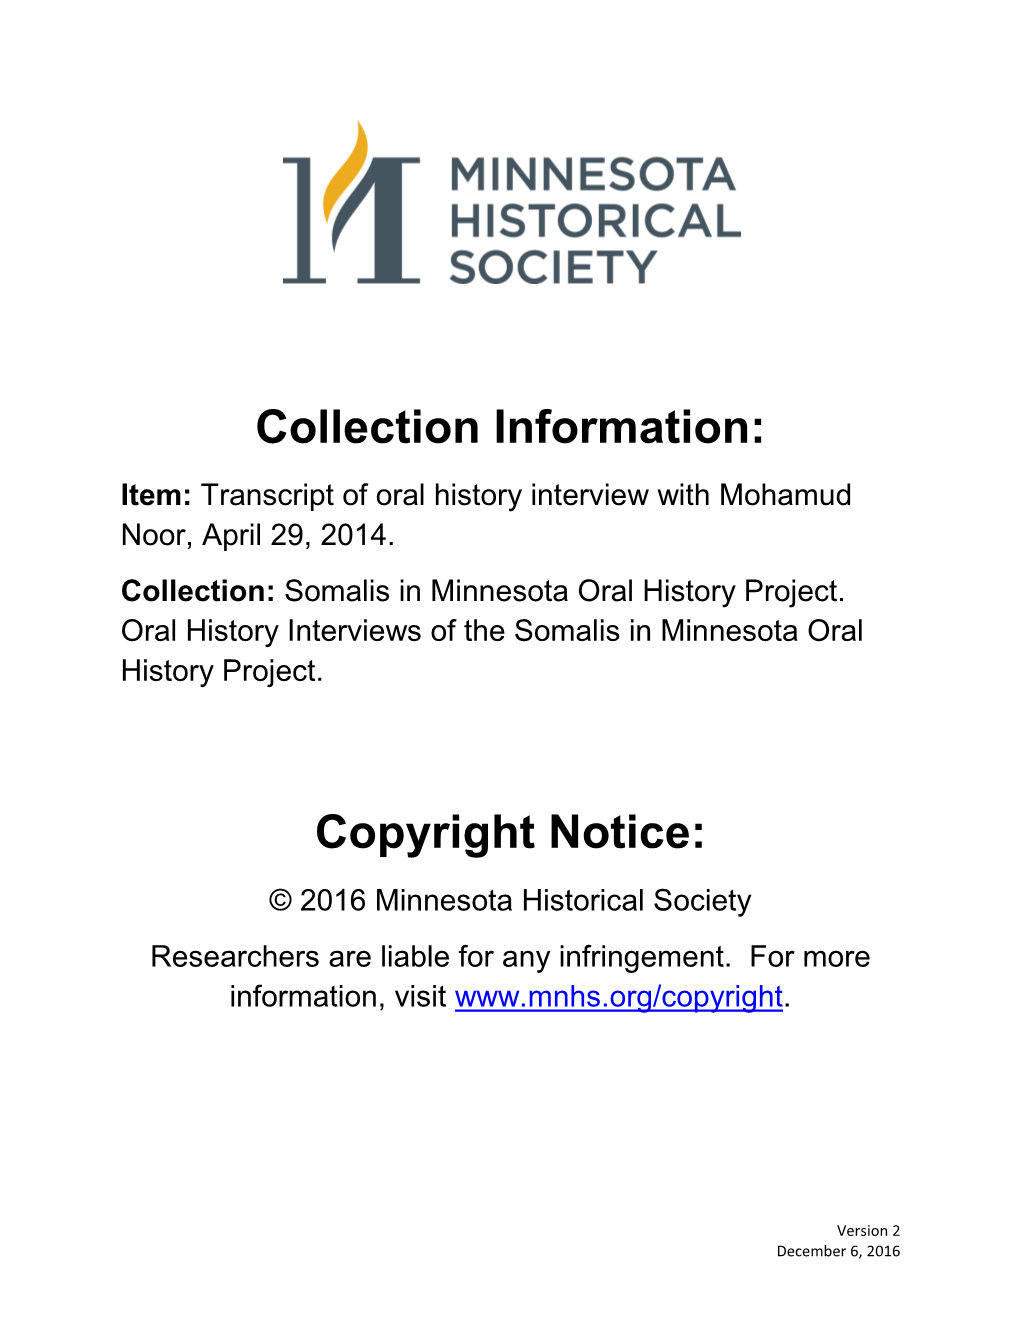 Transcript of Oral History Interview with Mohamud Noor